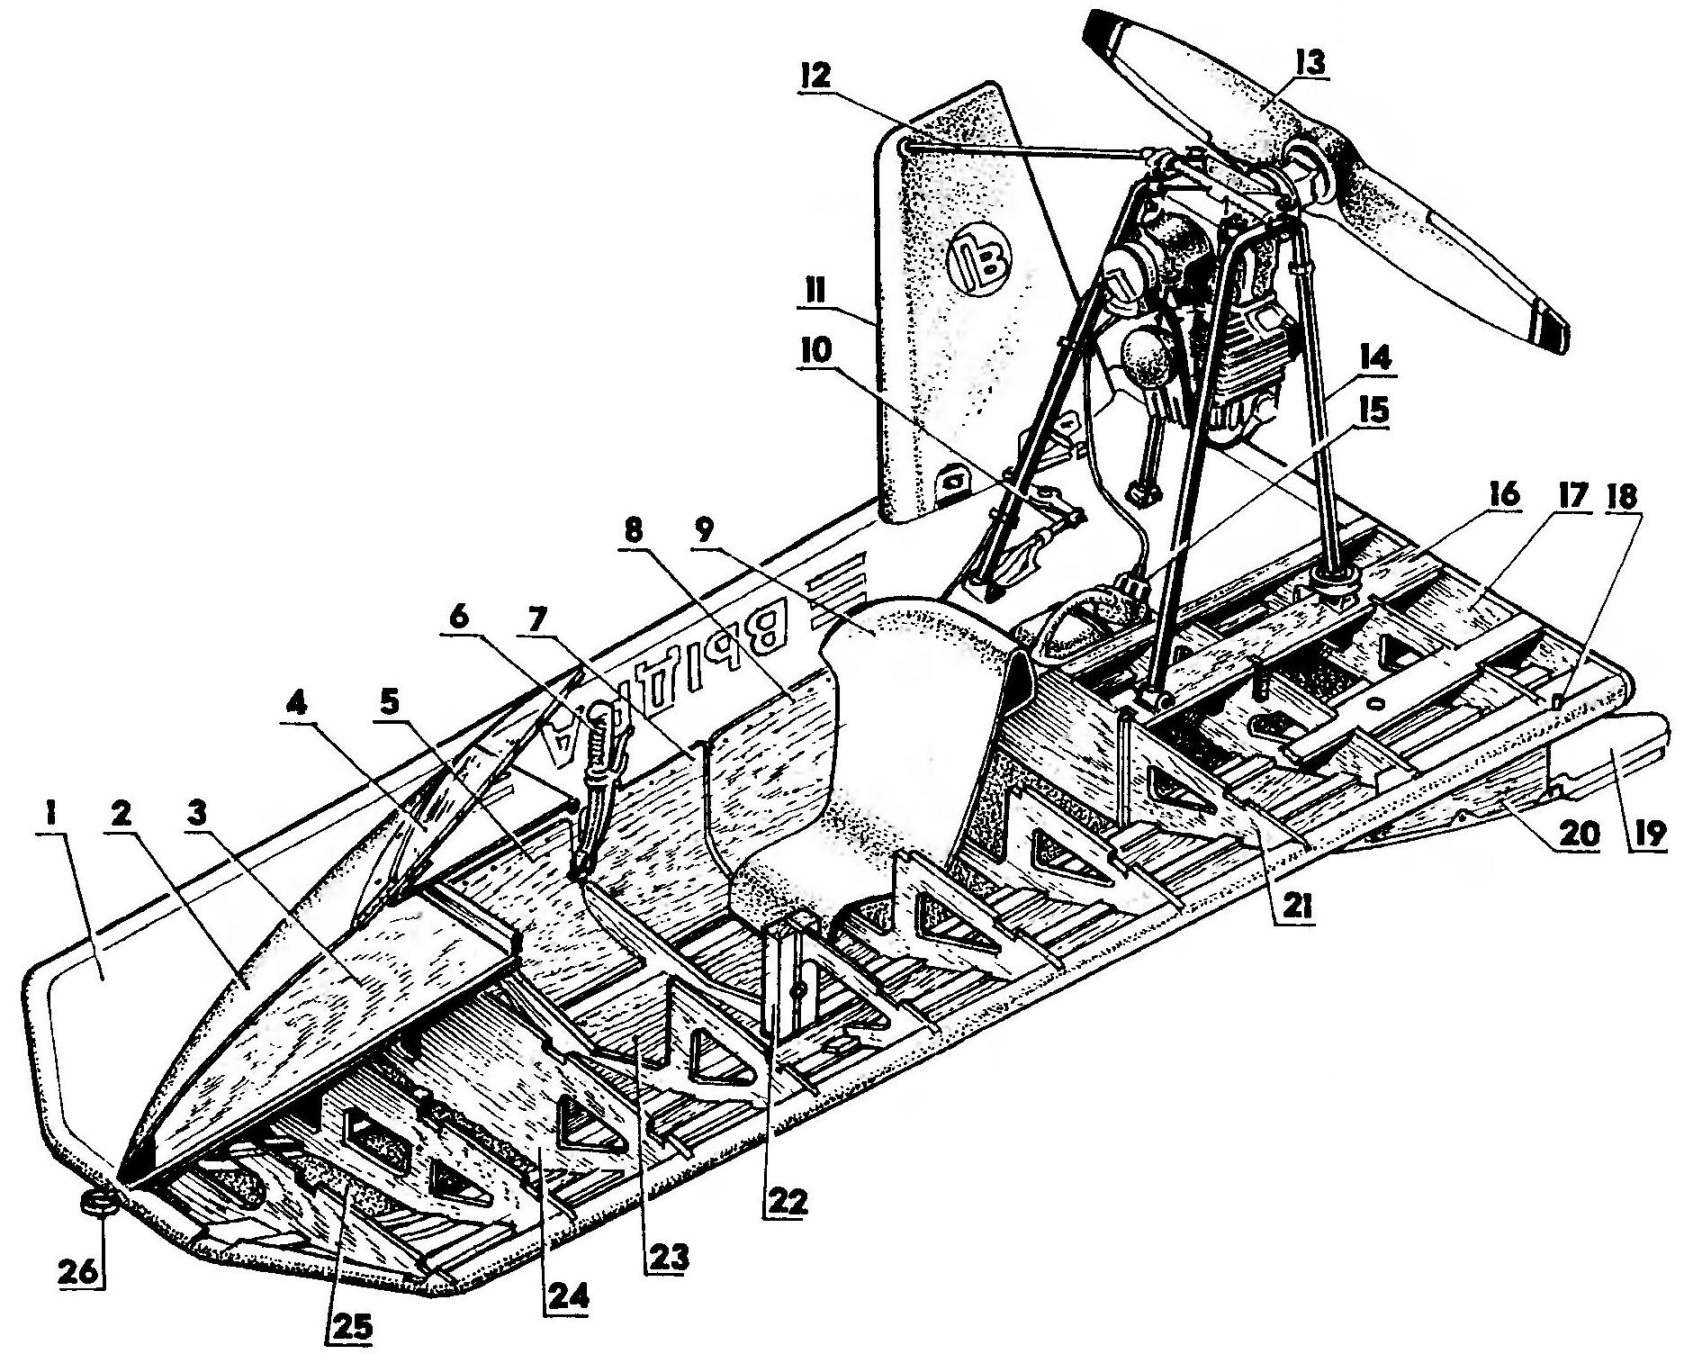 The layout of the snowmobile